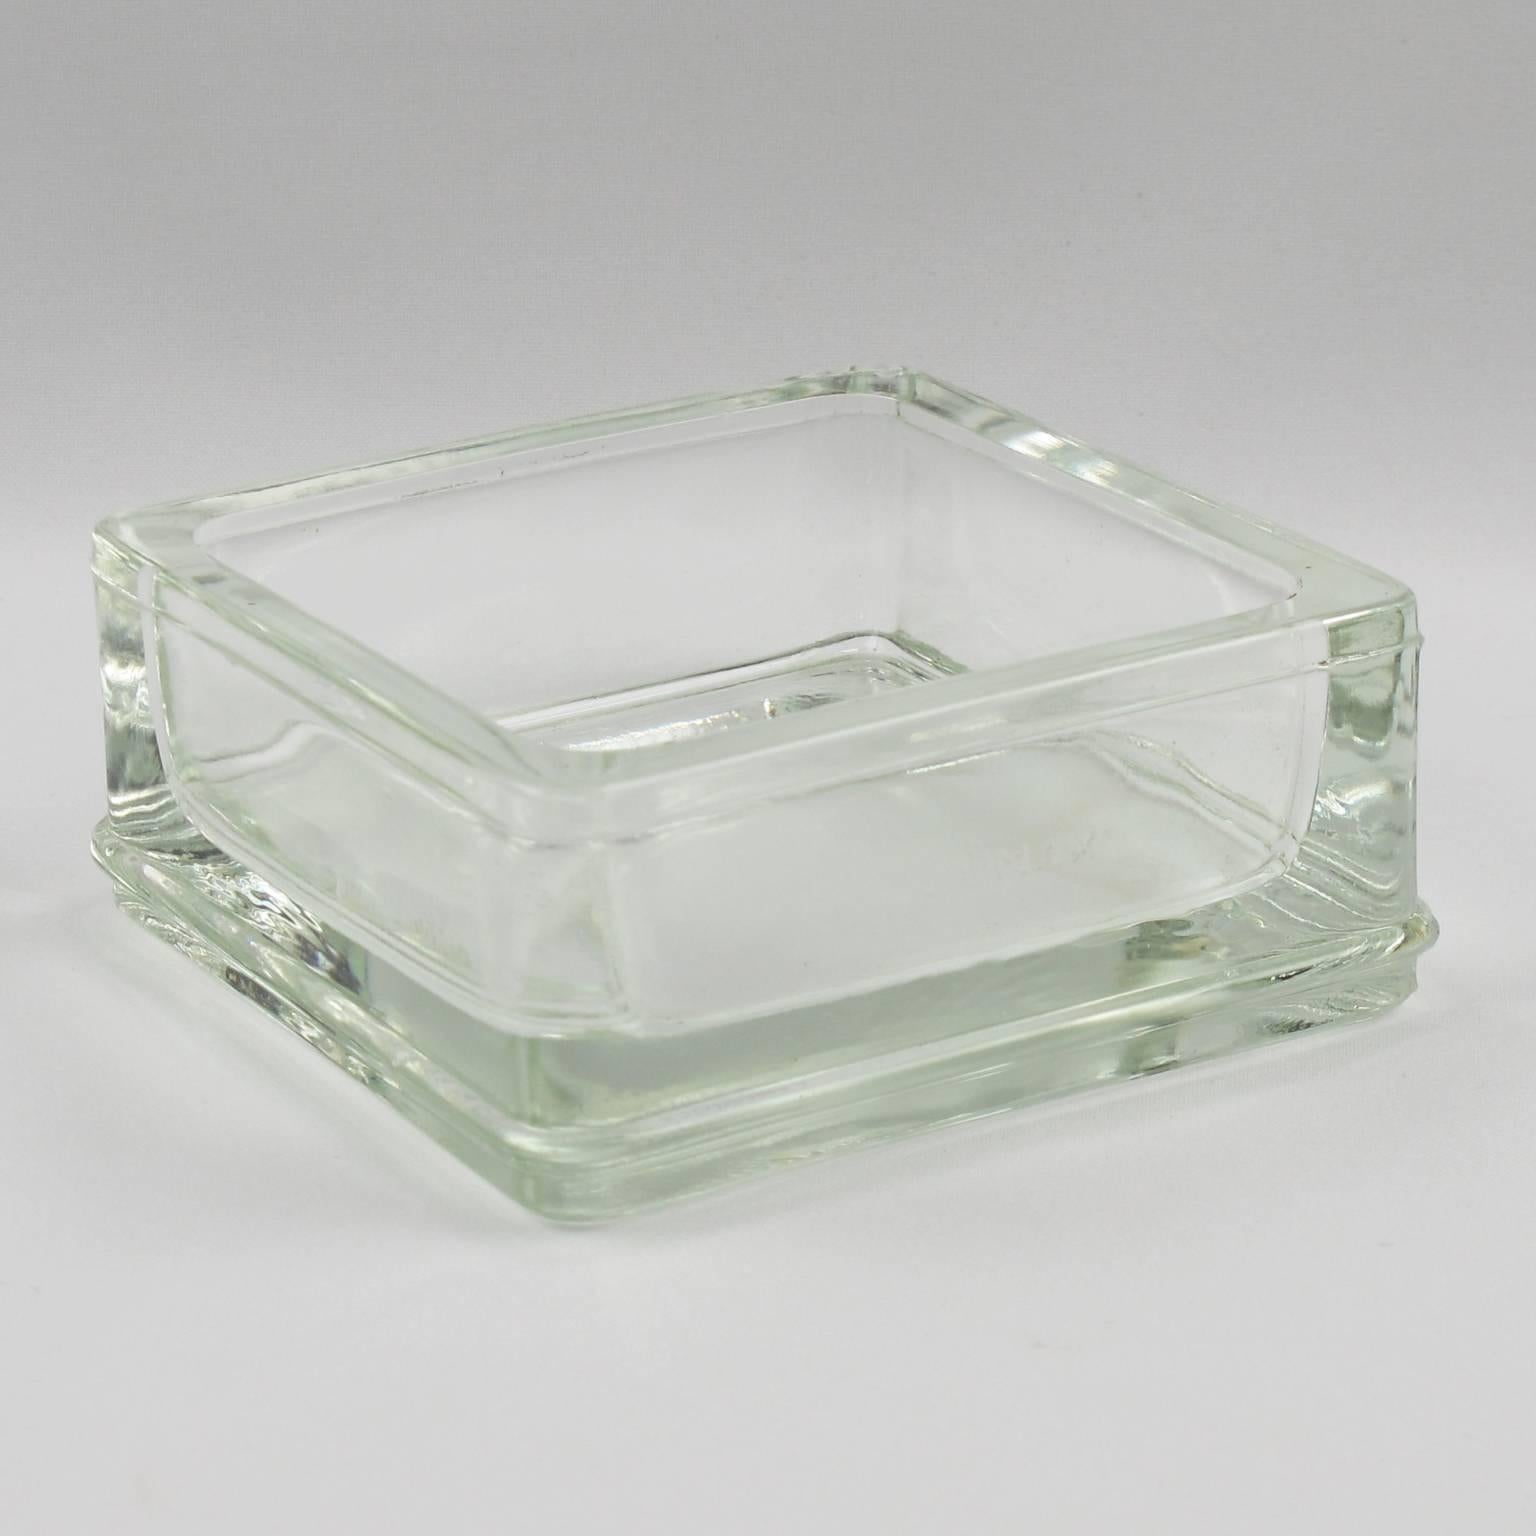 Designed by Le Corbusier for Lumax Molded Glass Desk Accessory Ashtray Catchall 1